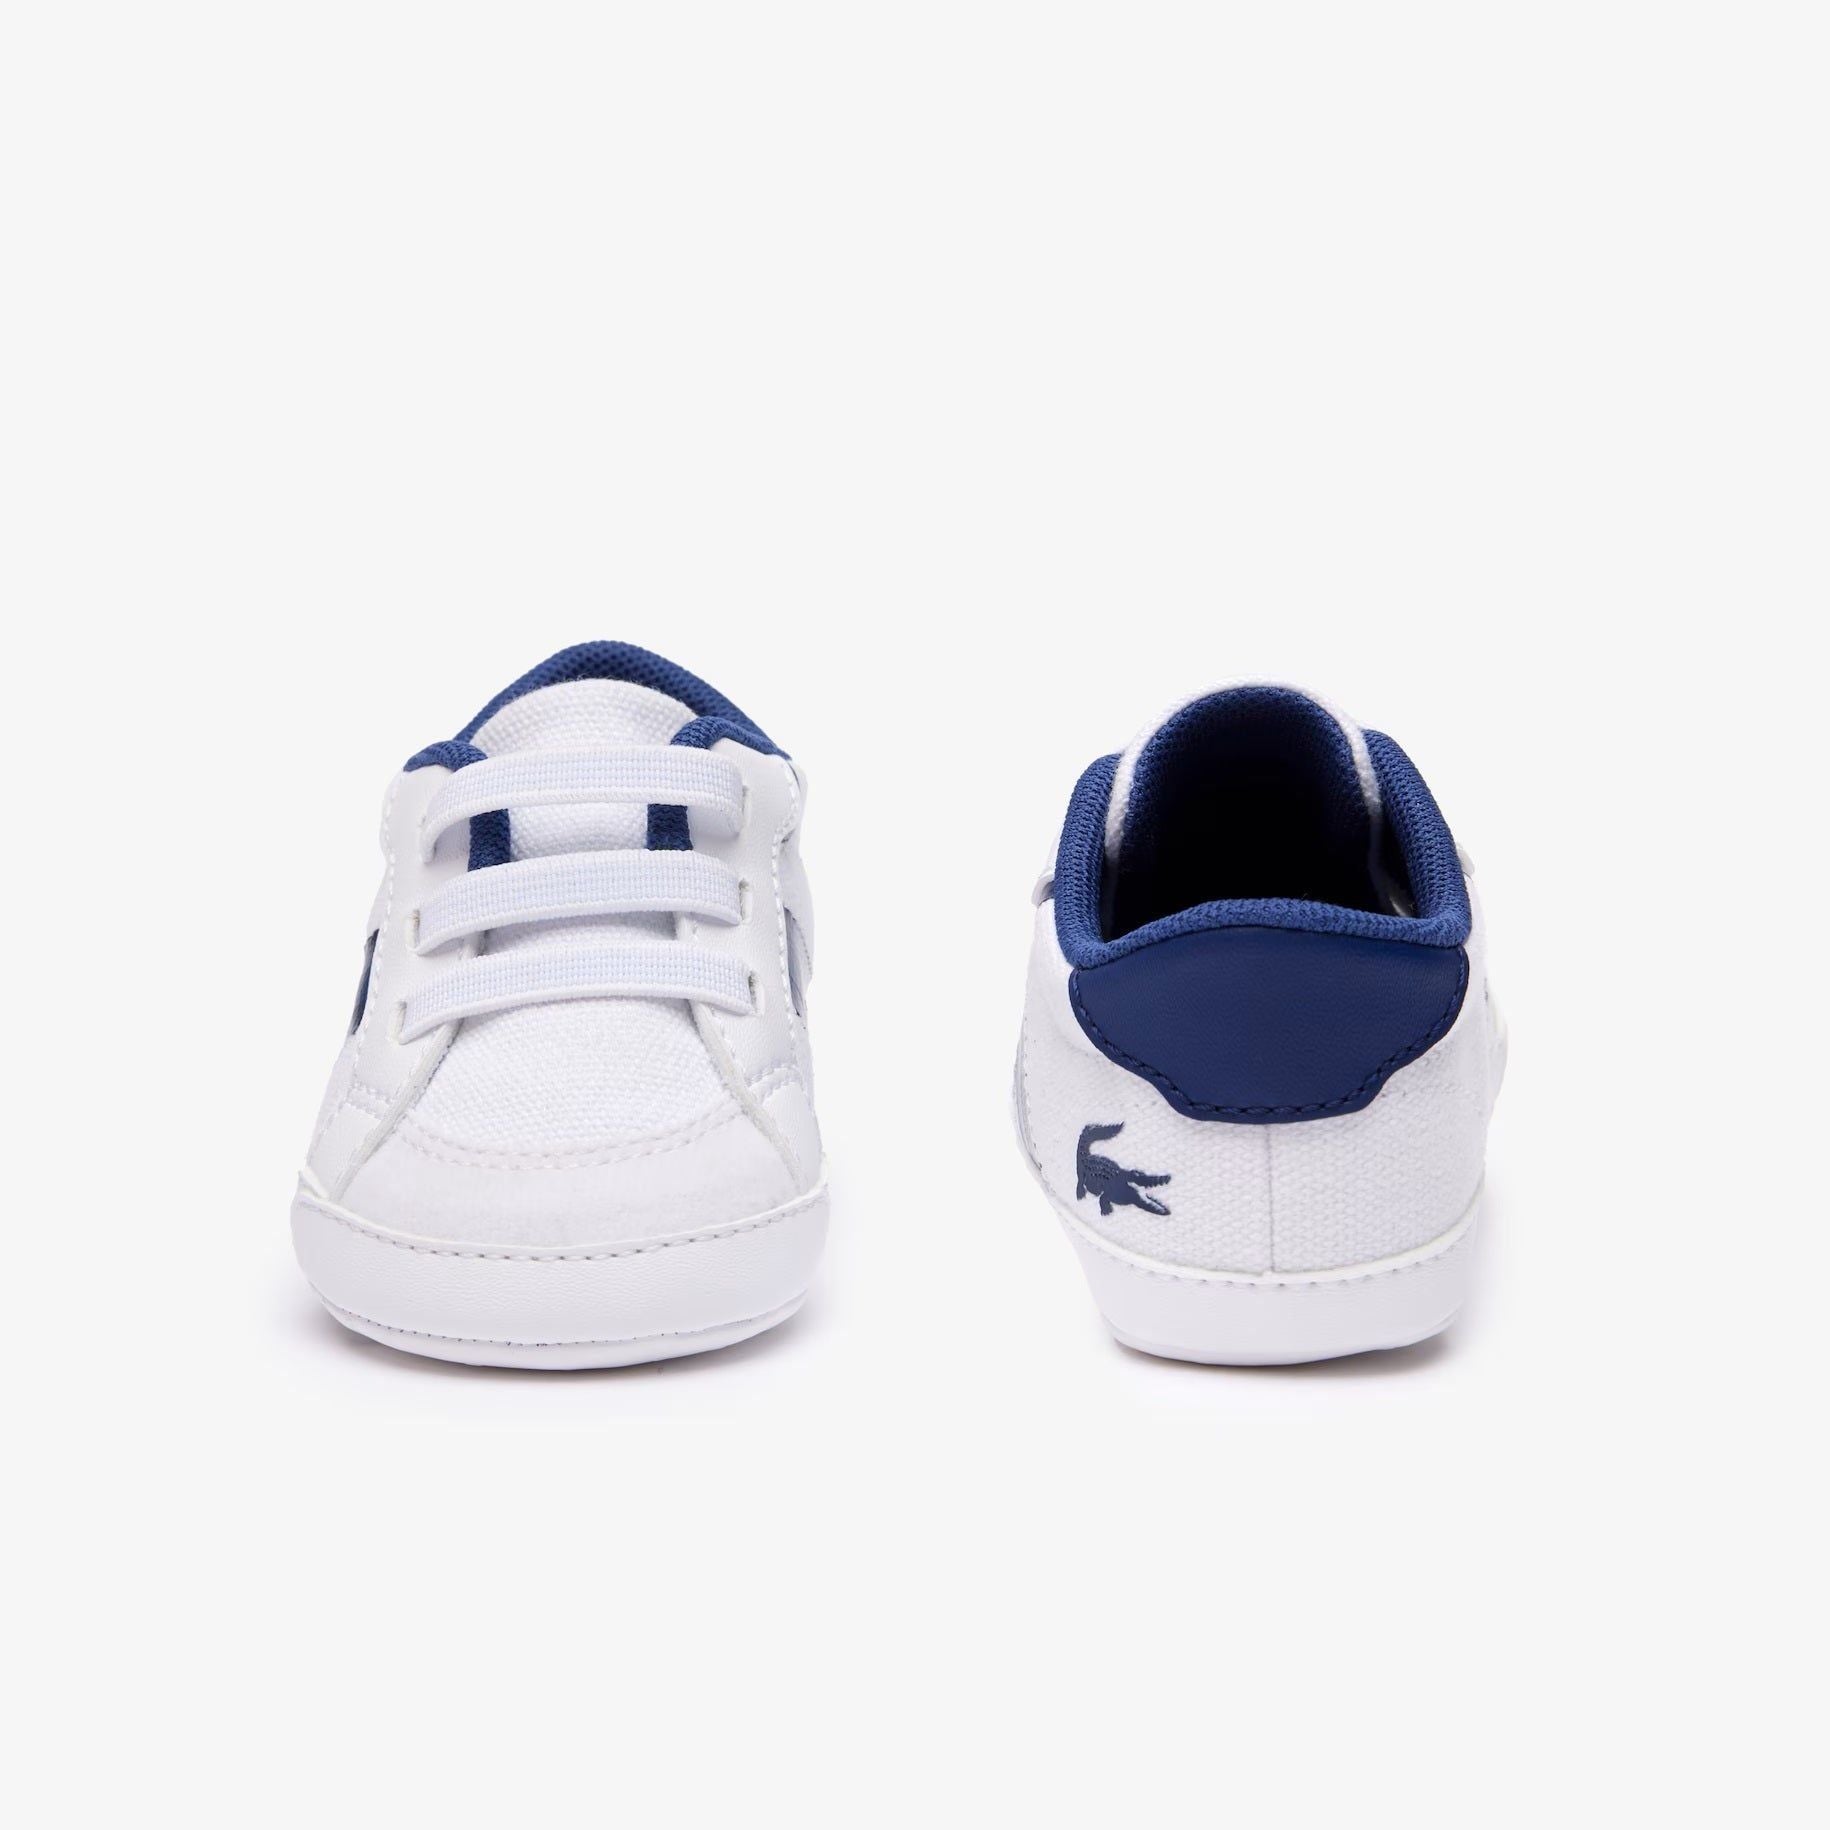 Lacoste L004 Crib Shoe BabyAlive & Dirty 